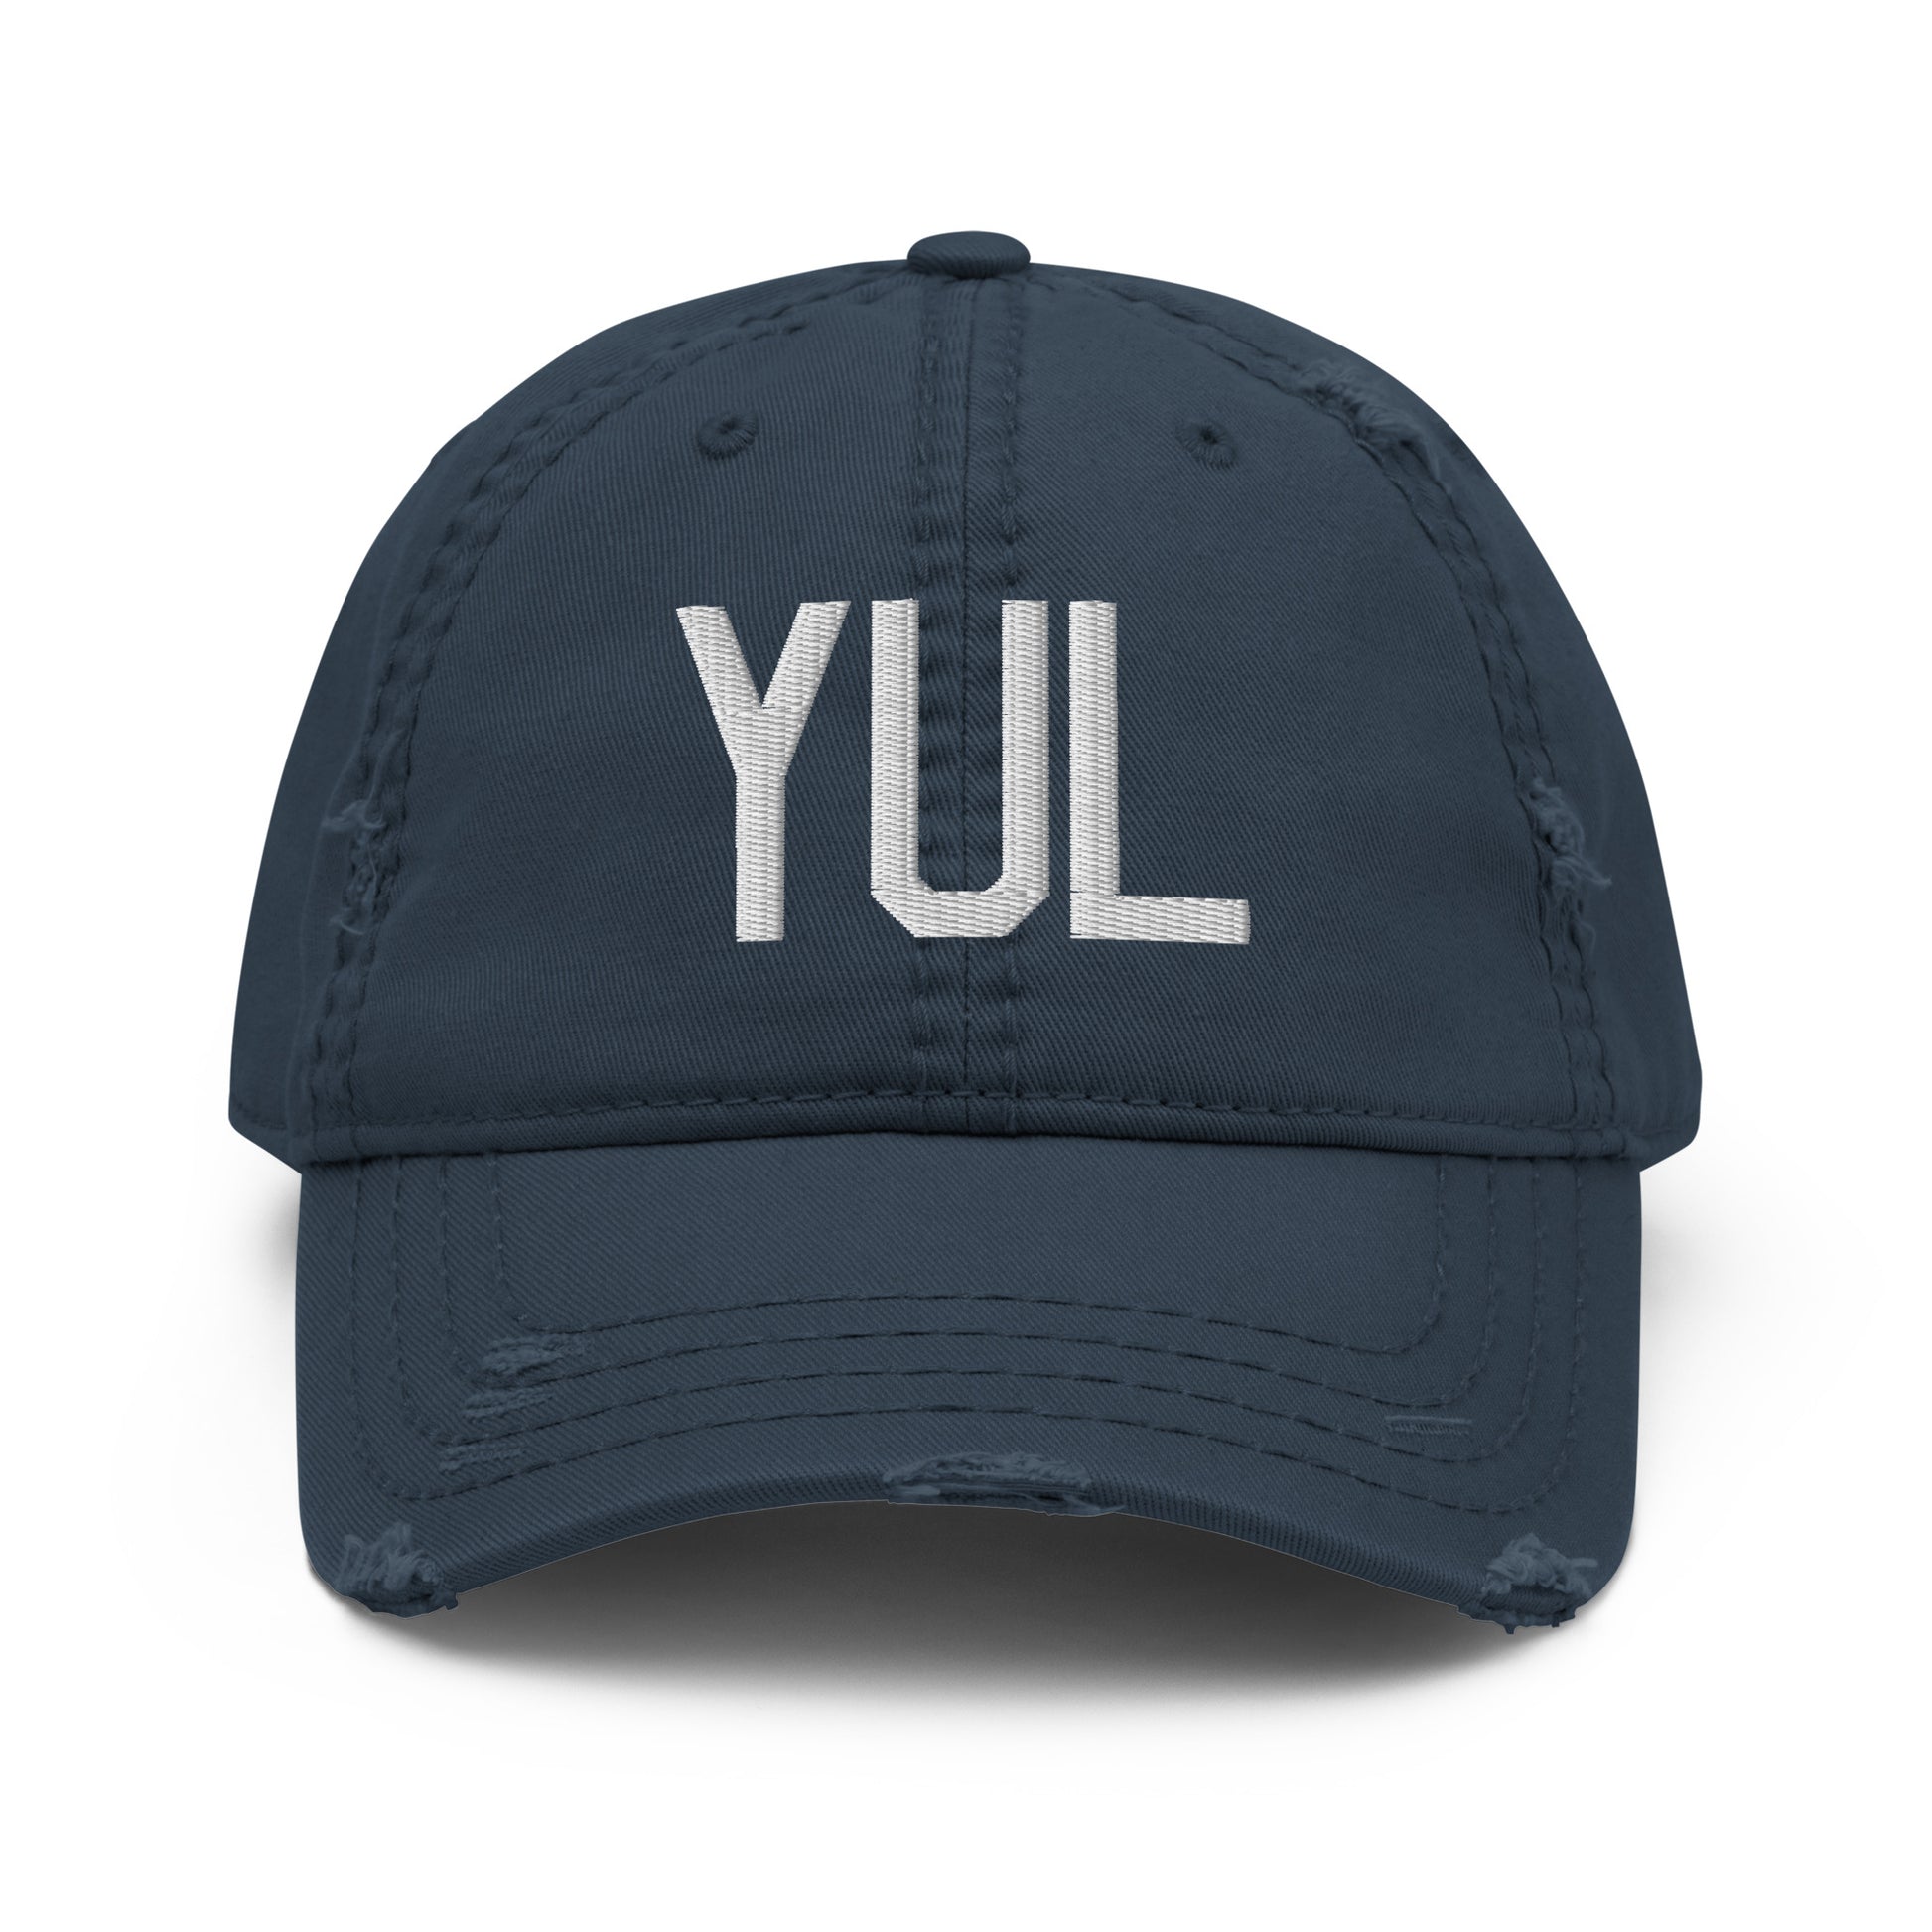 Airport Code Distressed Hat - White • YUL Montreal • YHM Designs - Image 13